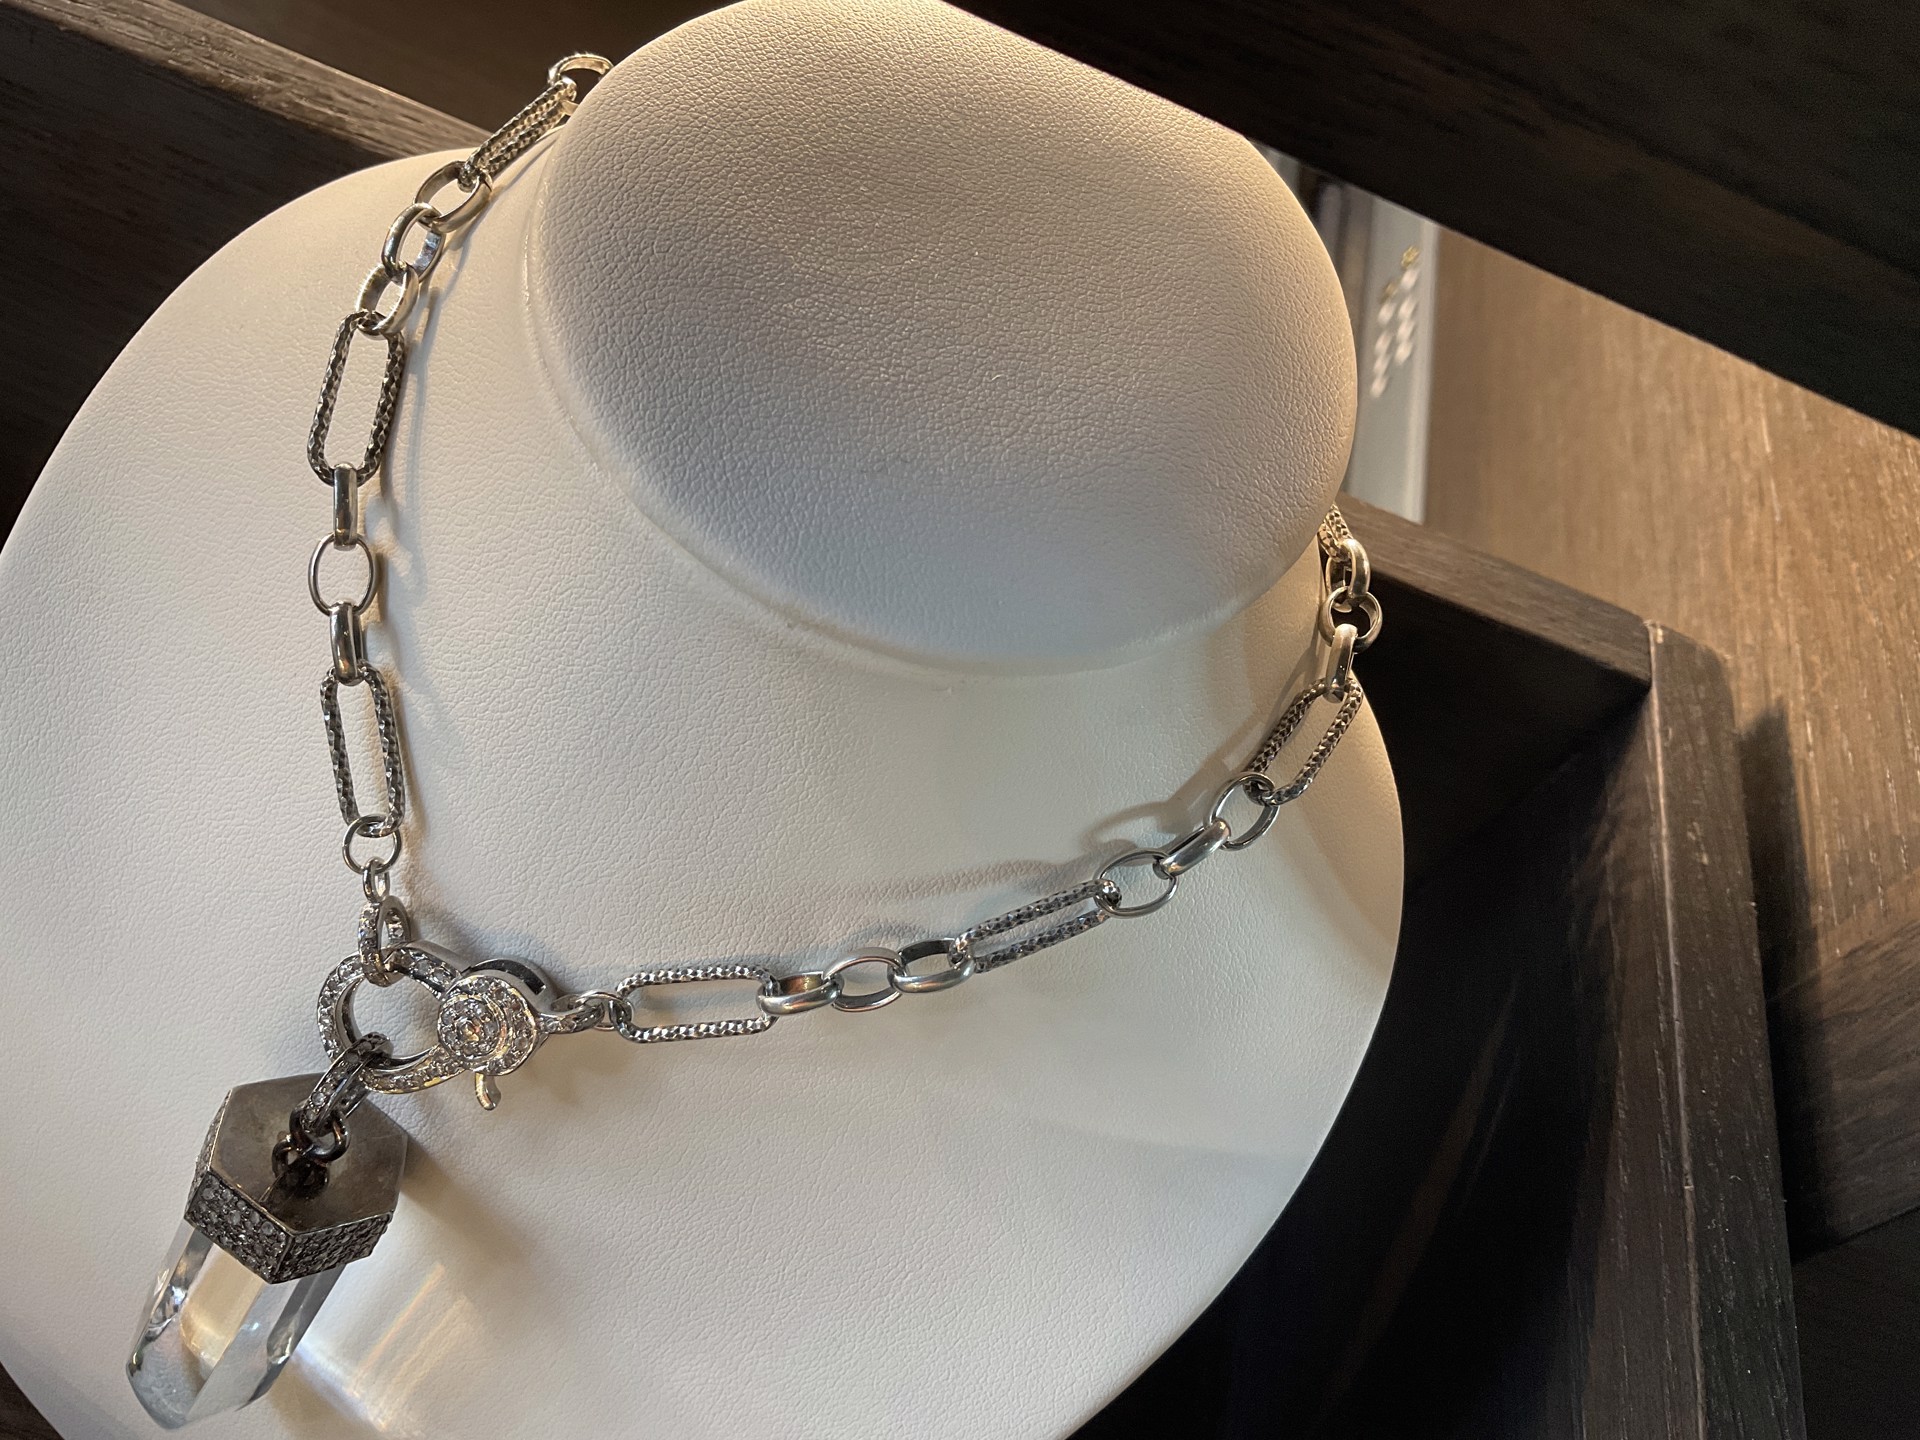 Oxidized Sterling Silver Chain with Pave Diamond Lobster Clasp-KB-N27, N31 by Karen Birchmier